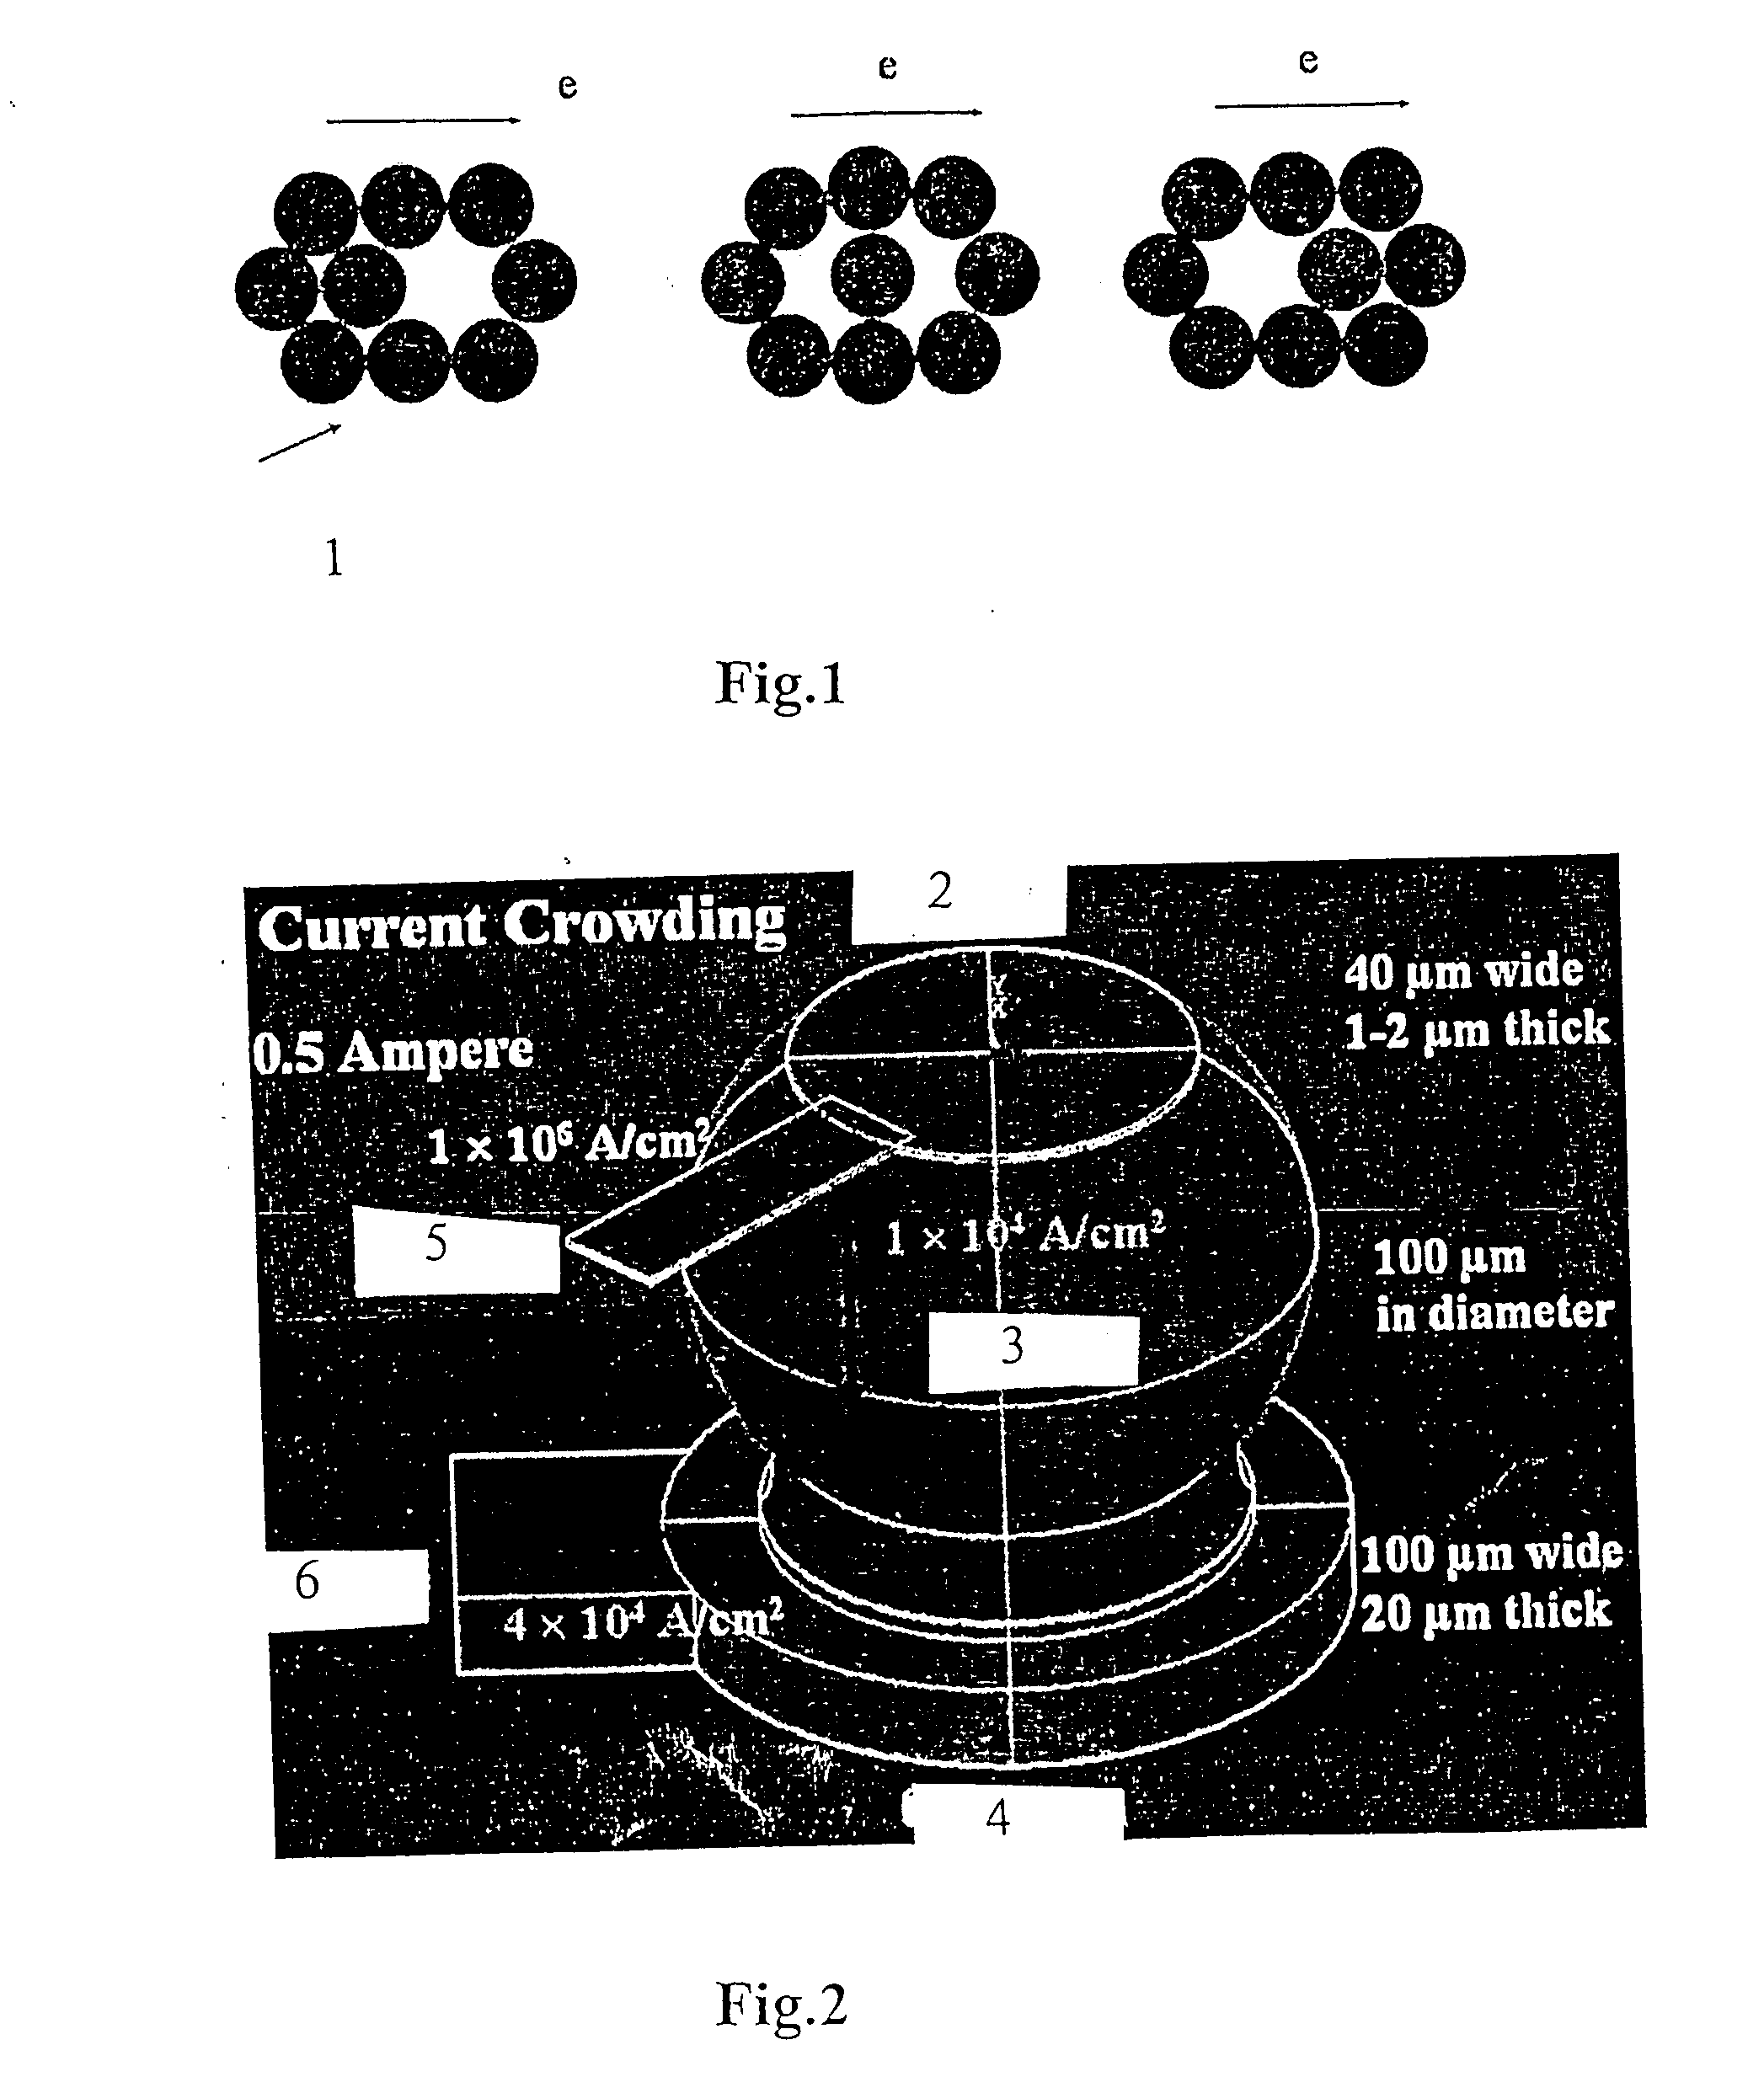 Process for protecting solder joints and structure for alleviating electromigration and joule heating in solder joints